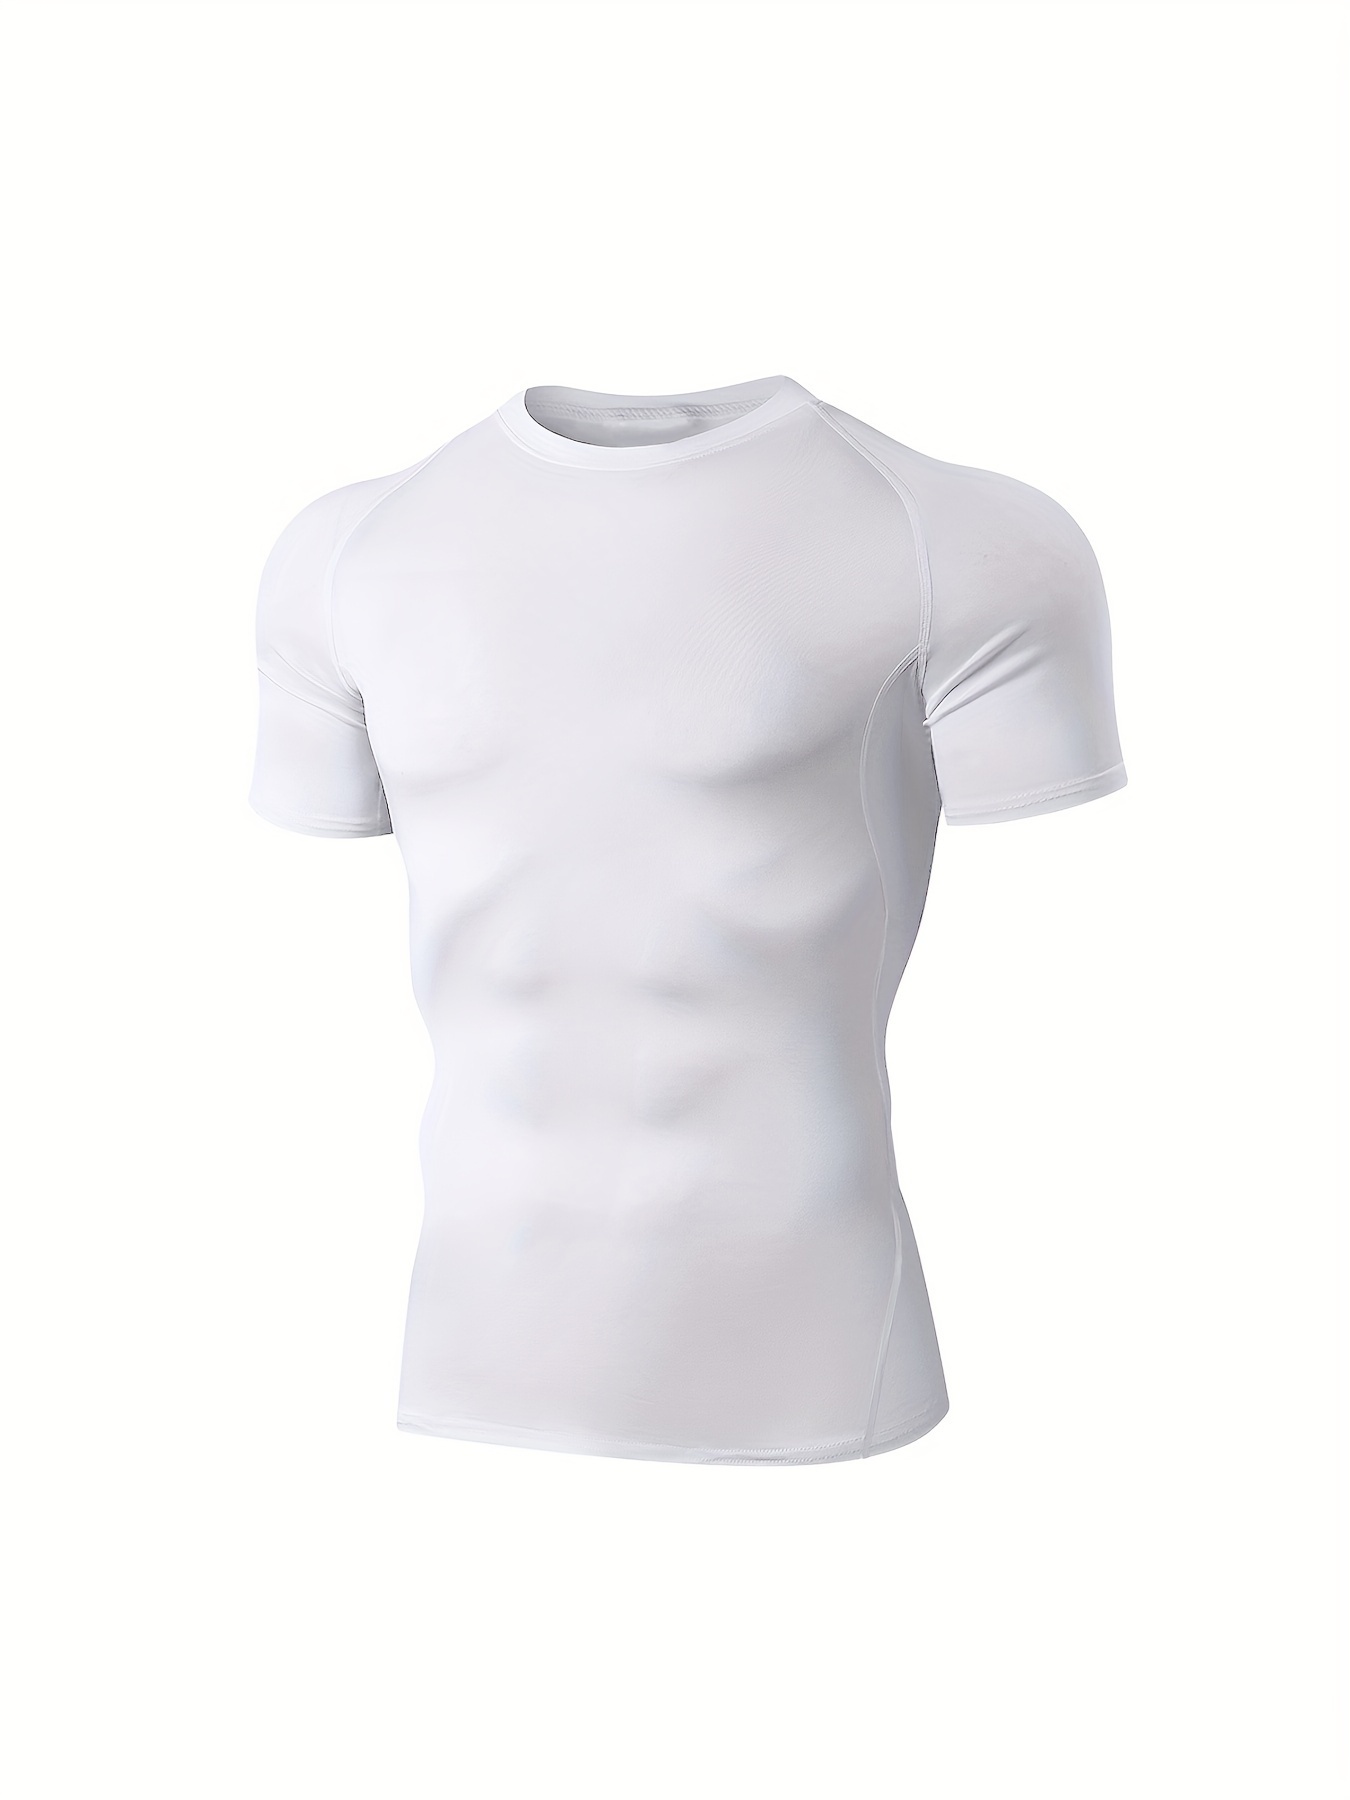 Under Armour Men's Tactical HeatGear Compression Shirt, White, Large,  Shirts -  Canada